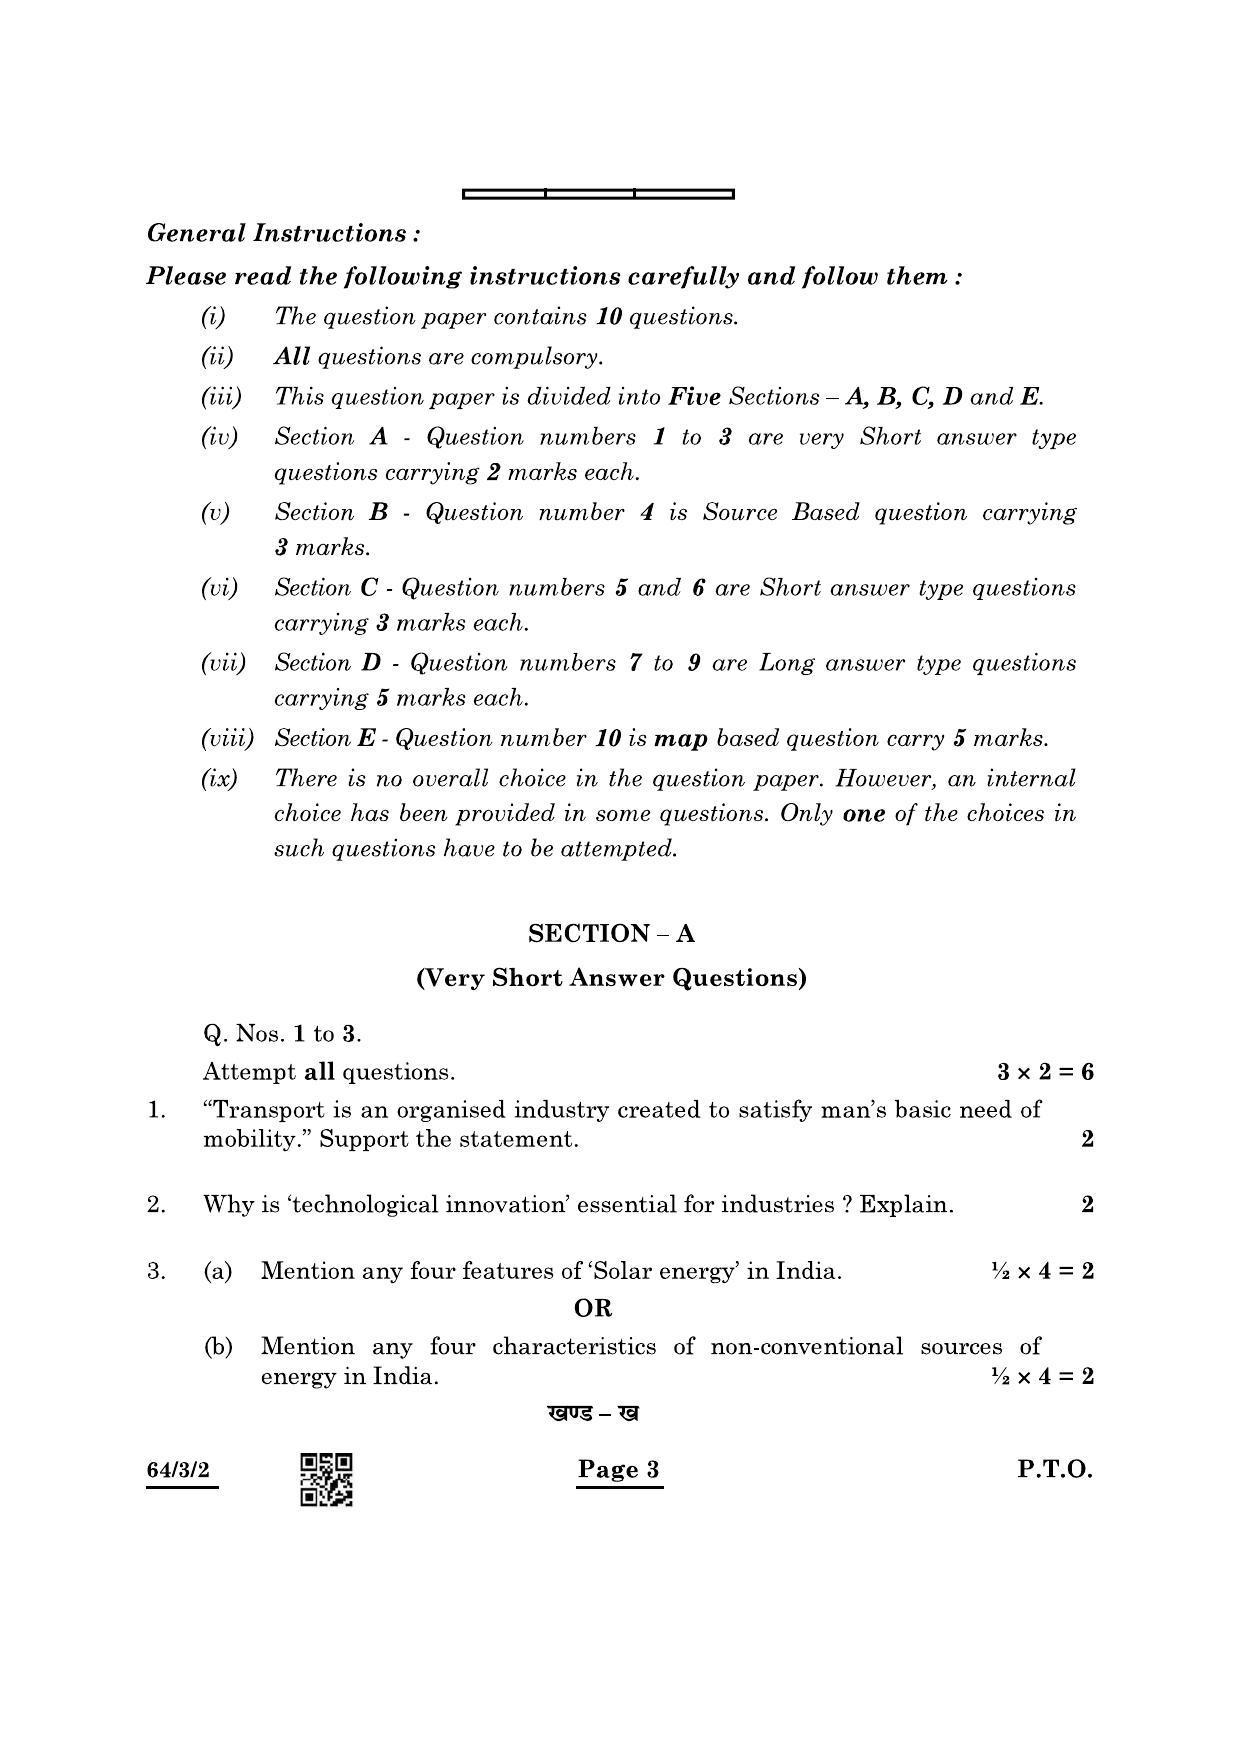 CBSE Class 12 64-3-2 Geography 2022 Question Paper - Page 3